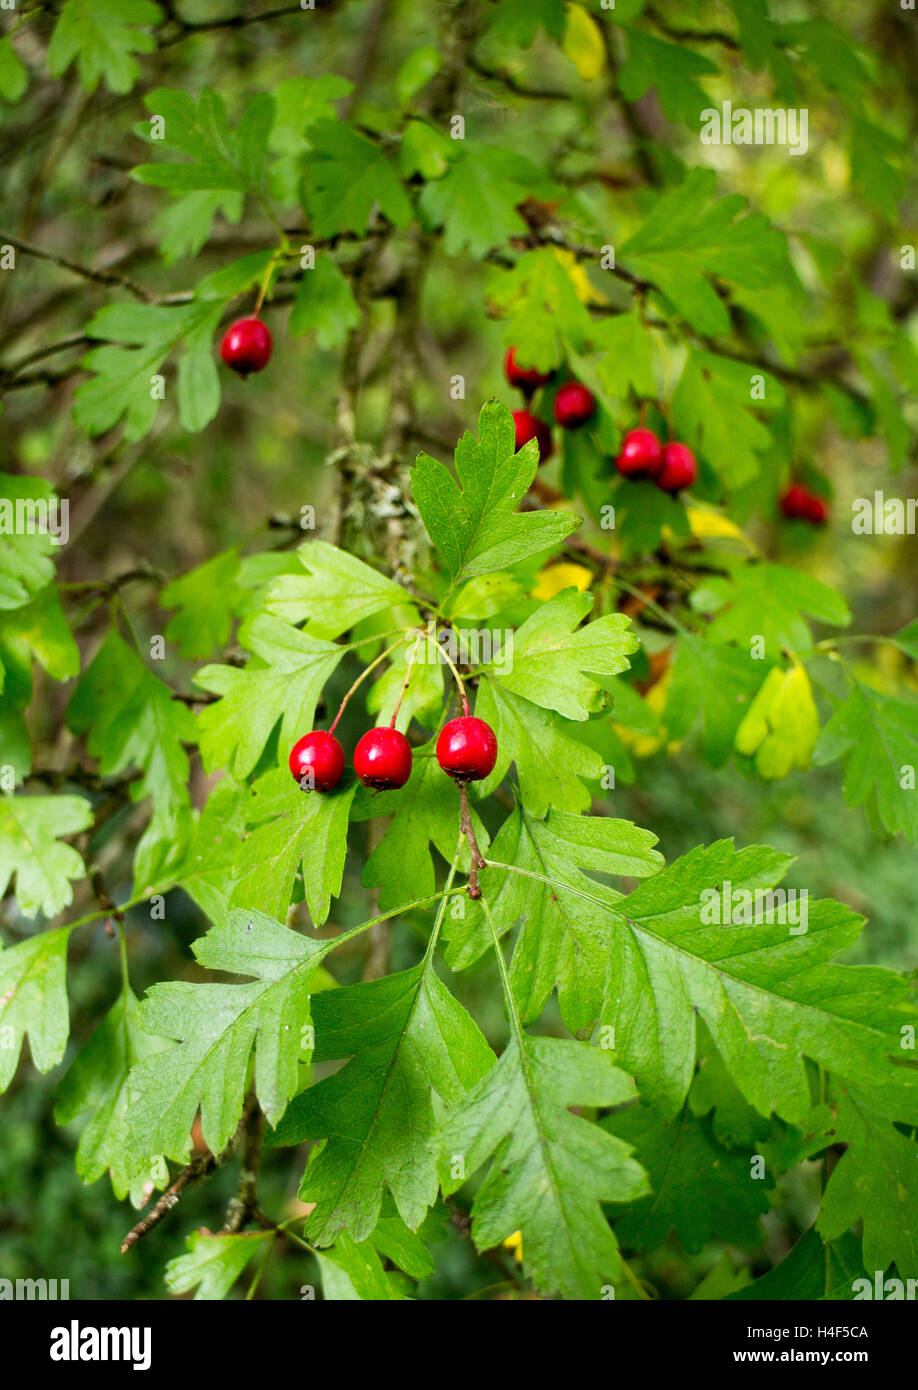 In fall hawthorn berries turn red and they are edible plant, nature feeds us, Vancouver Island Stock Photo